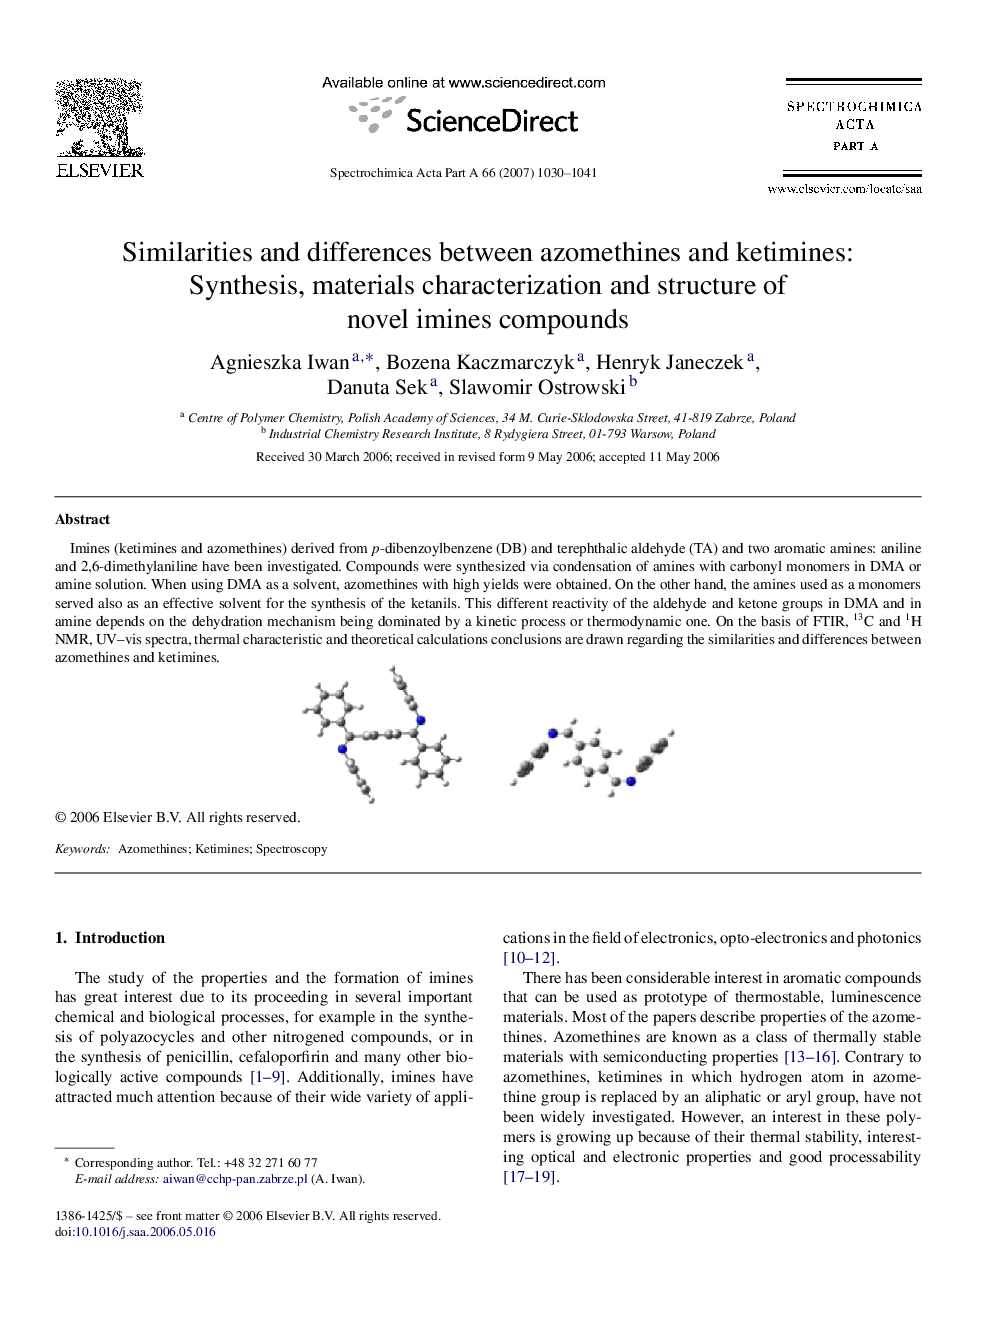 Similarities and differences between azomethines and ketimines: Synthesis, materials characterization and structure of novel imines compounds